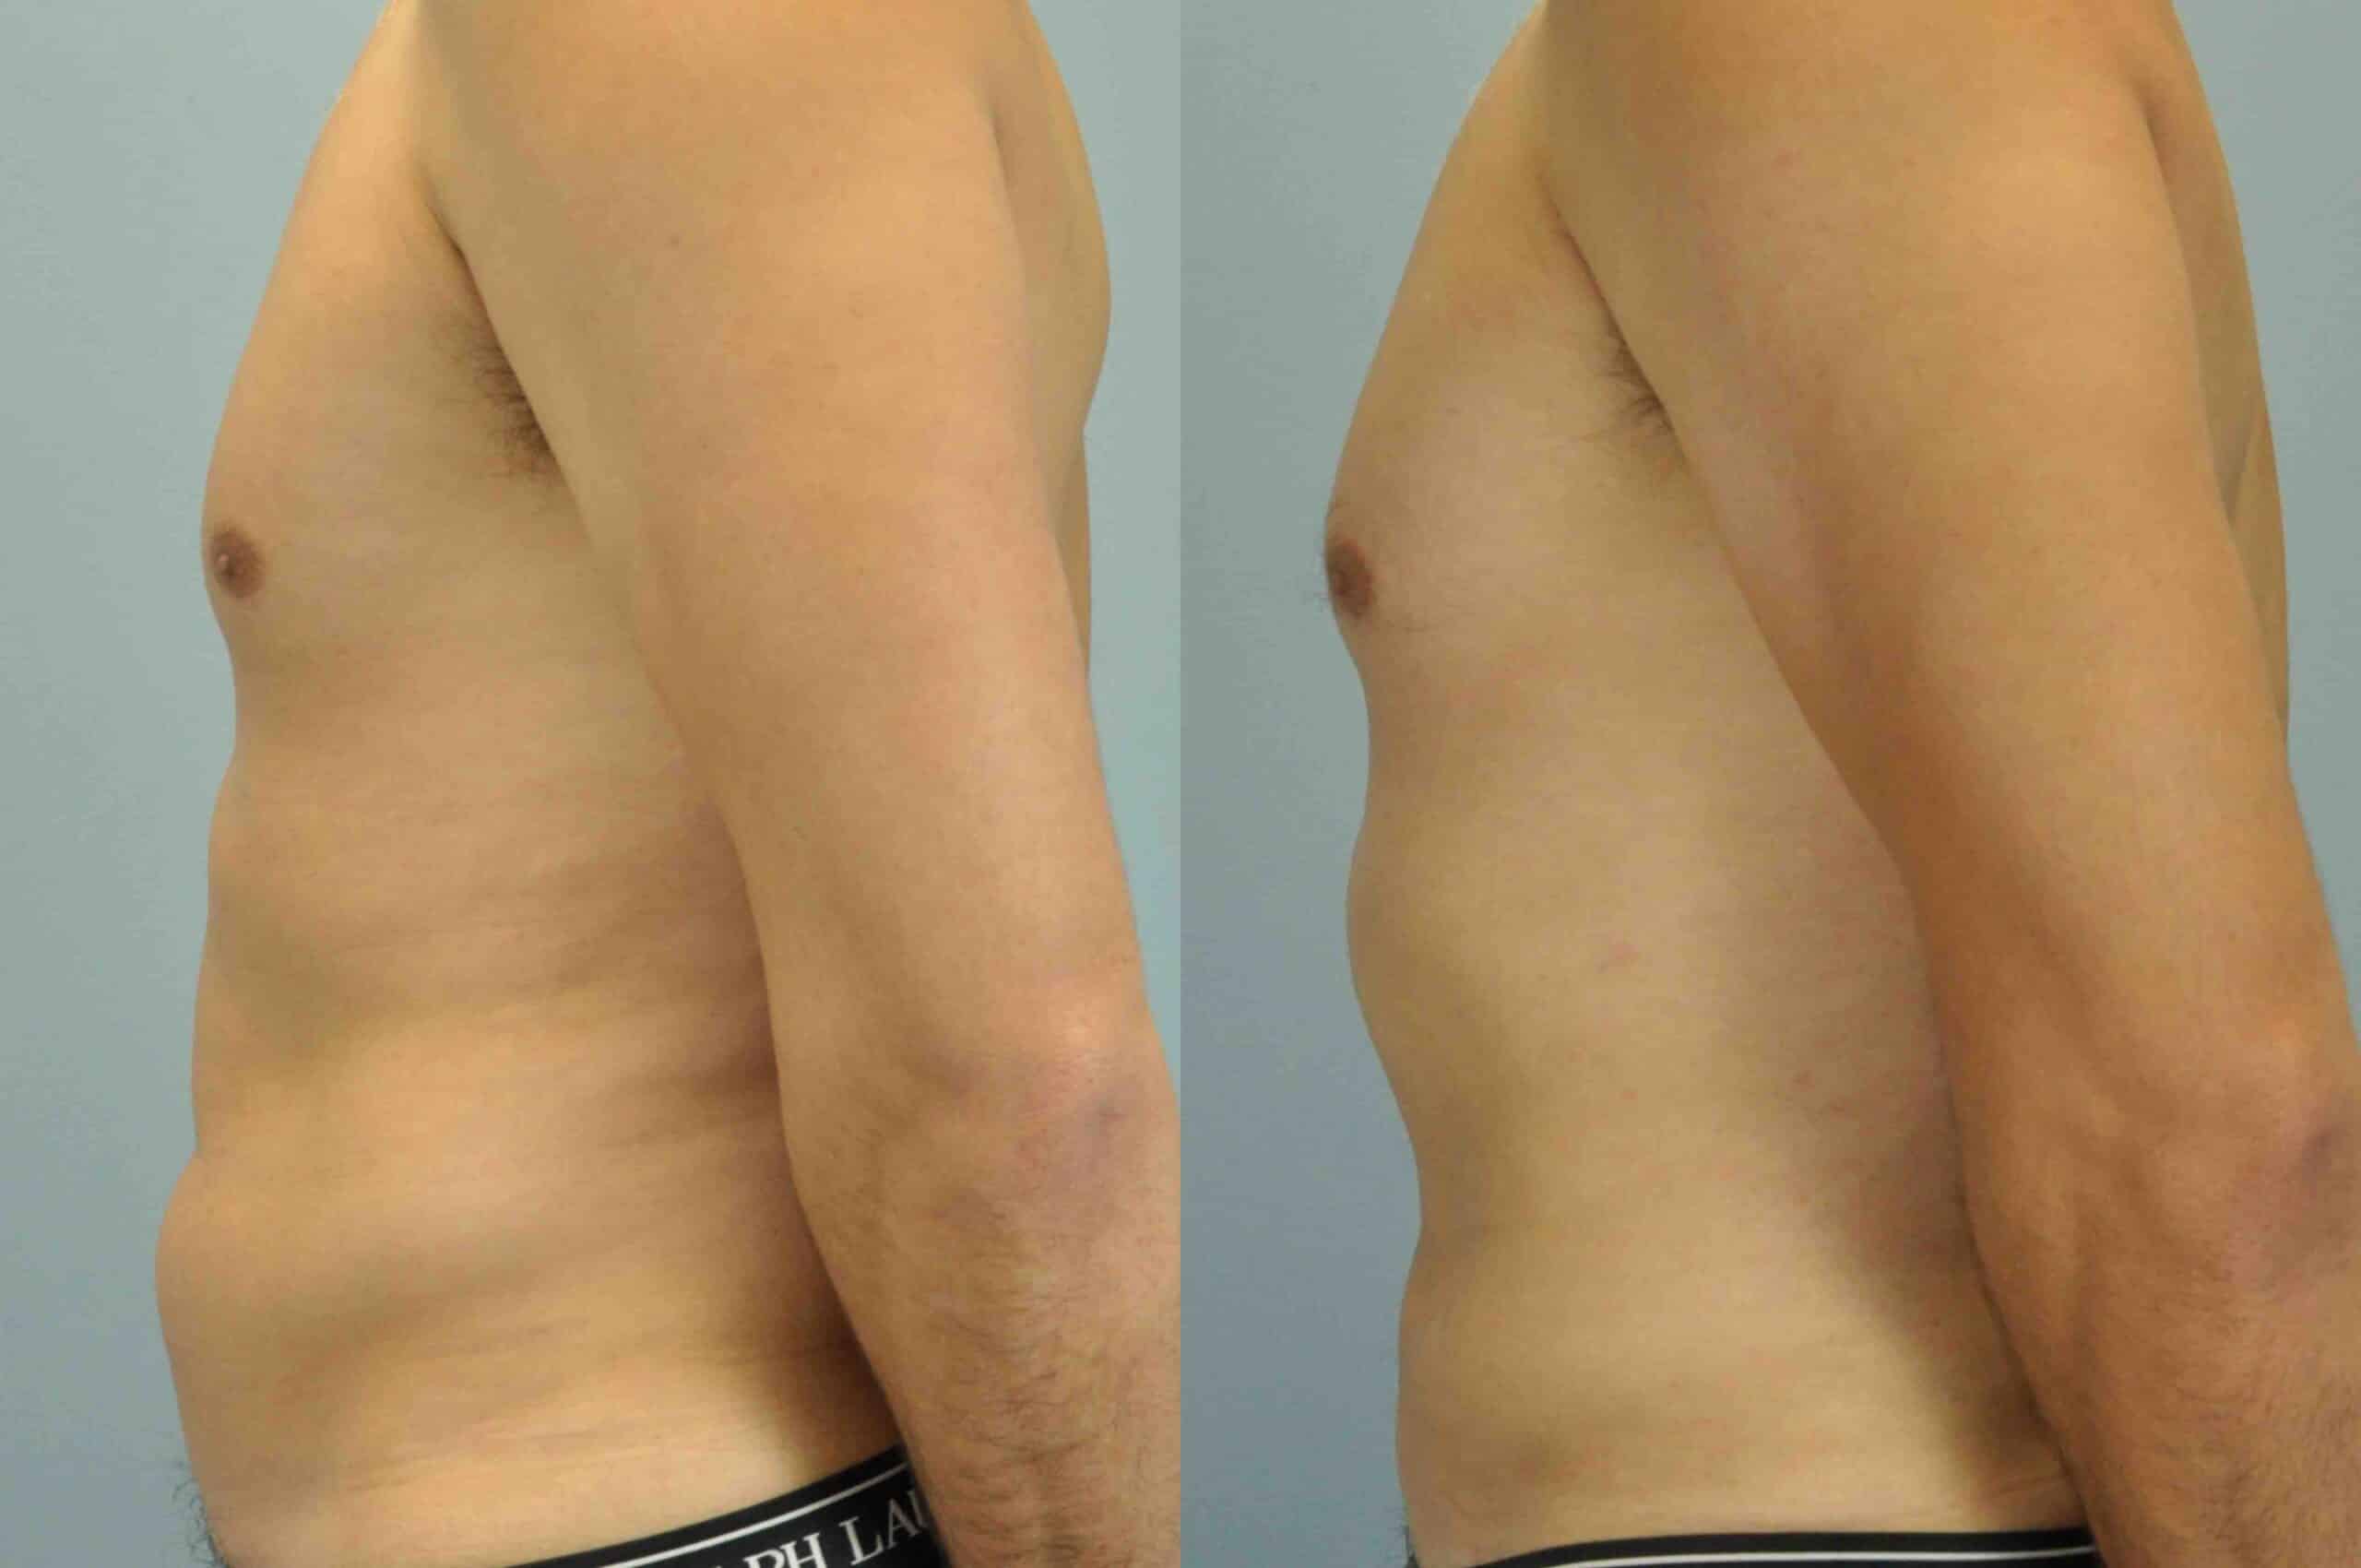 Before and after, patient 2 mo post op from VASER Abdomen and Flanks procedures performed by Dr. Paul Vanek